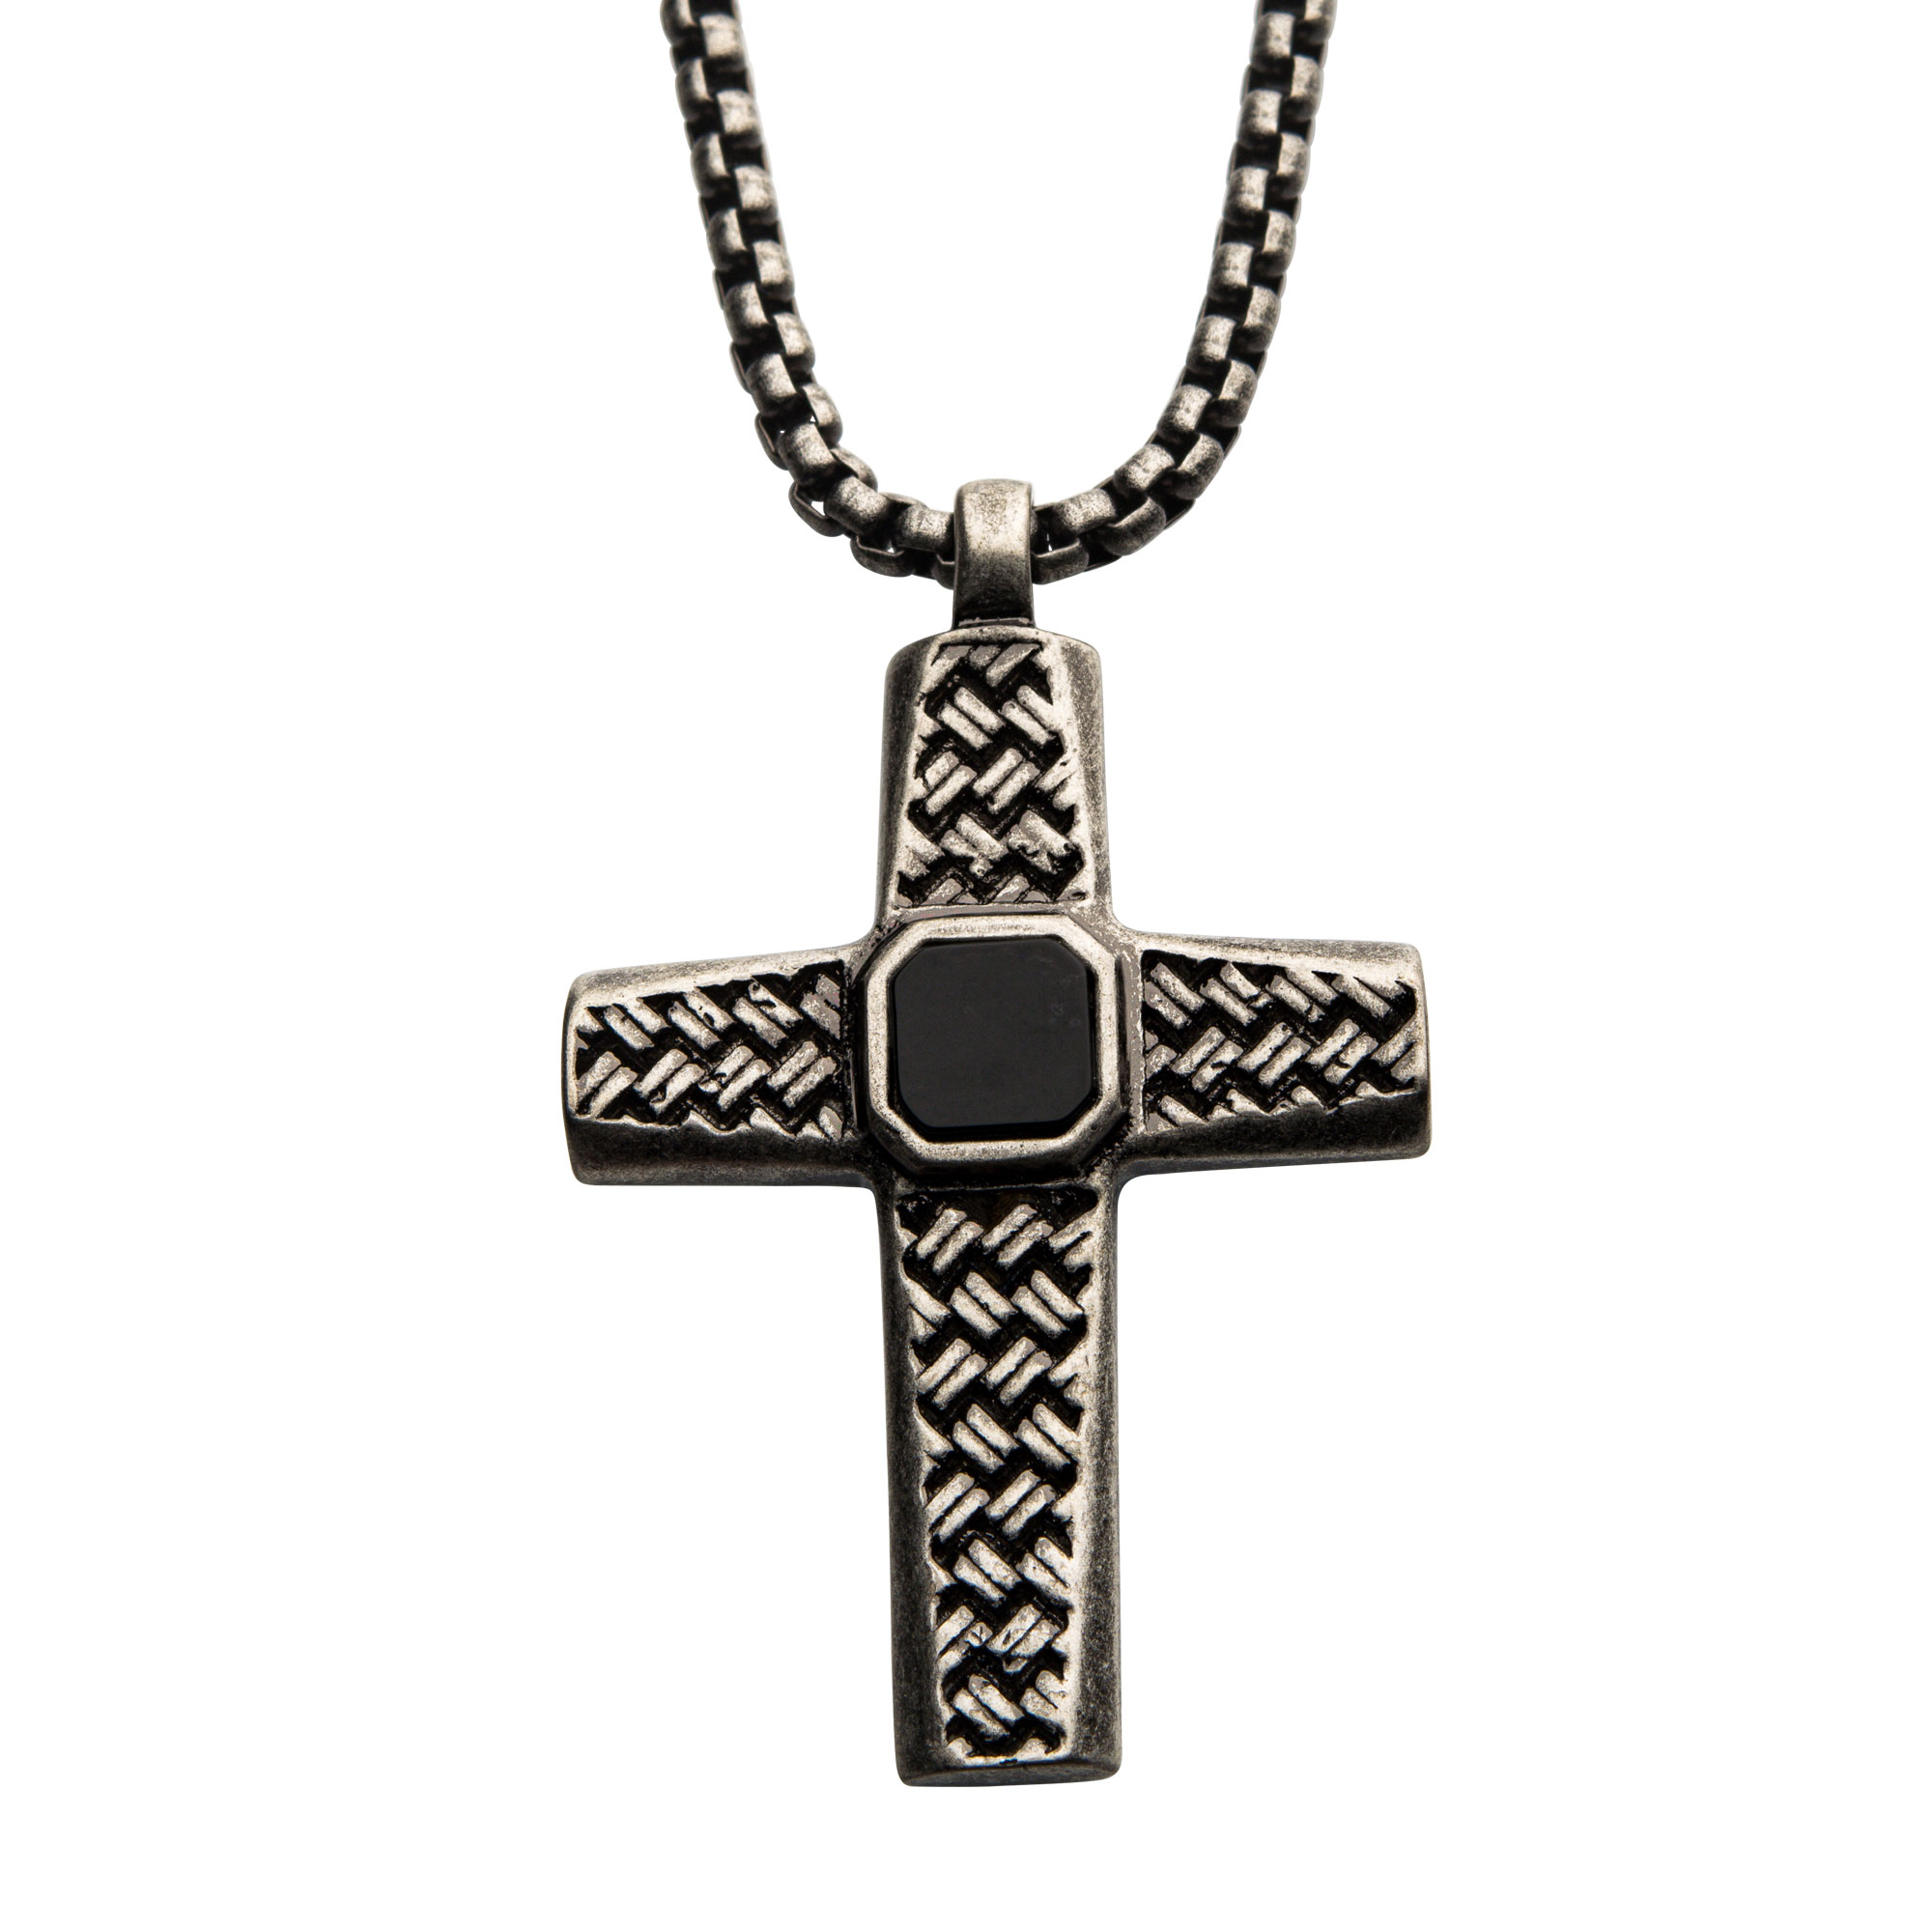 Stainless Steel Silver Plated Cross Pendant with Black Agate Stone, with Steel Box Chain Ken Walker Jewelers Gig Harbor, WA